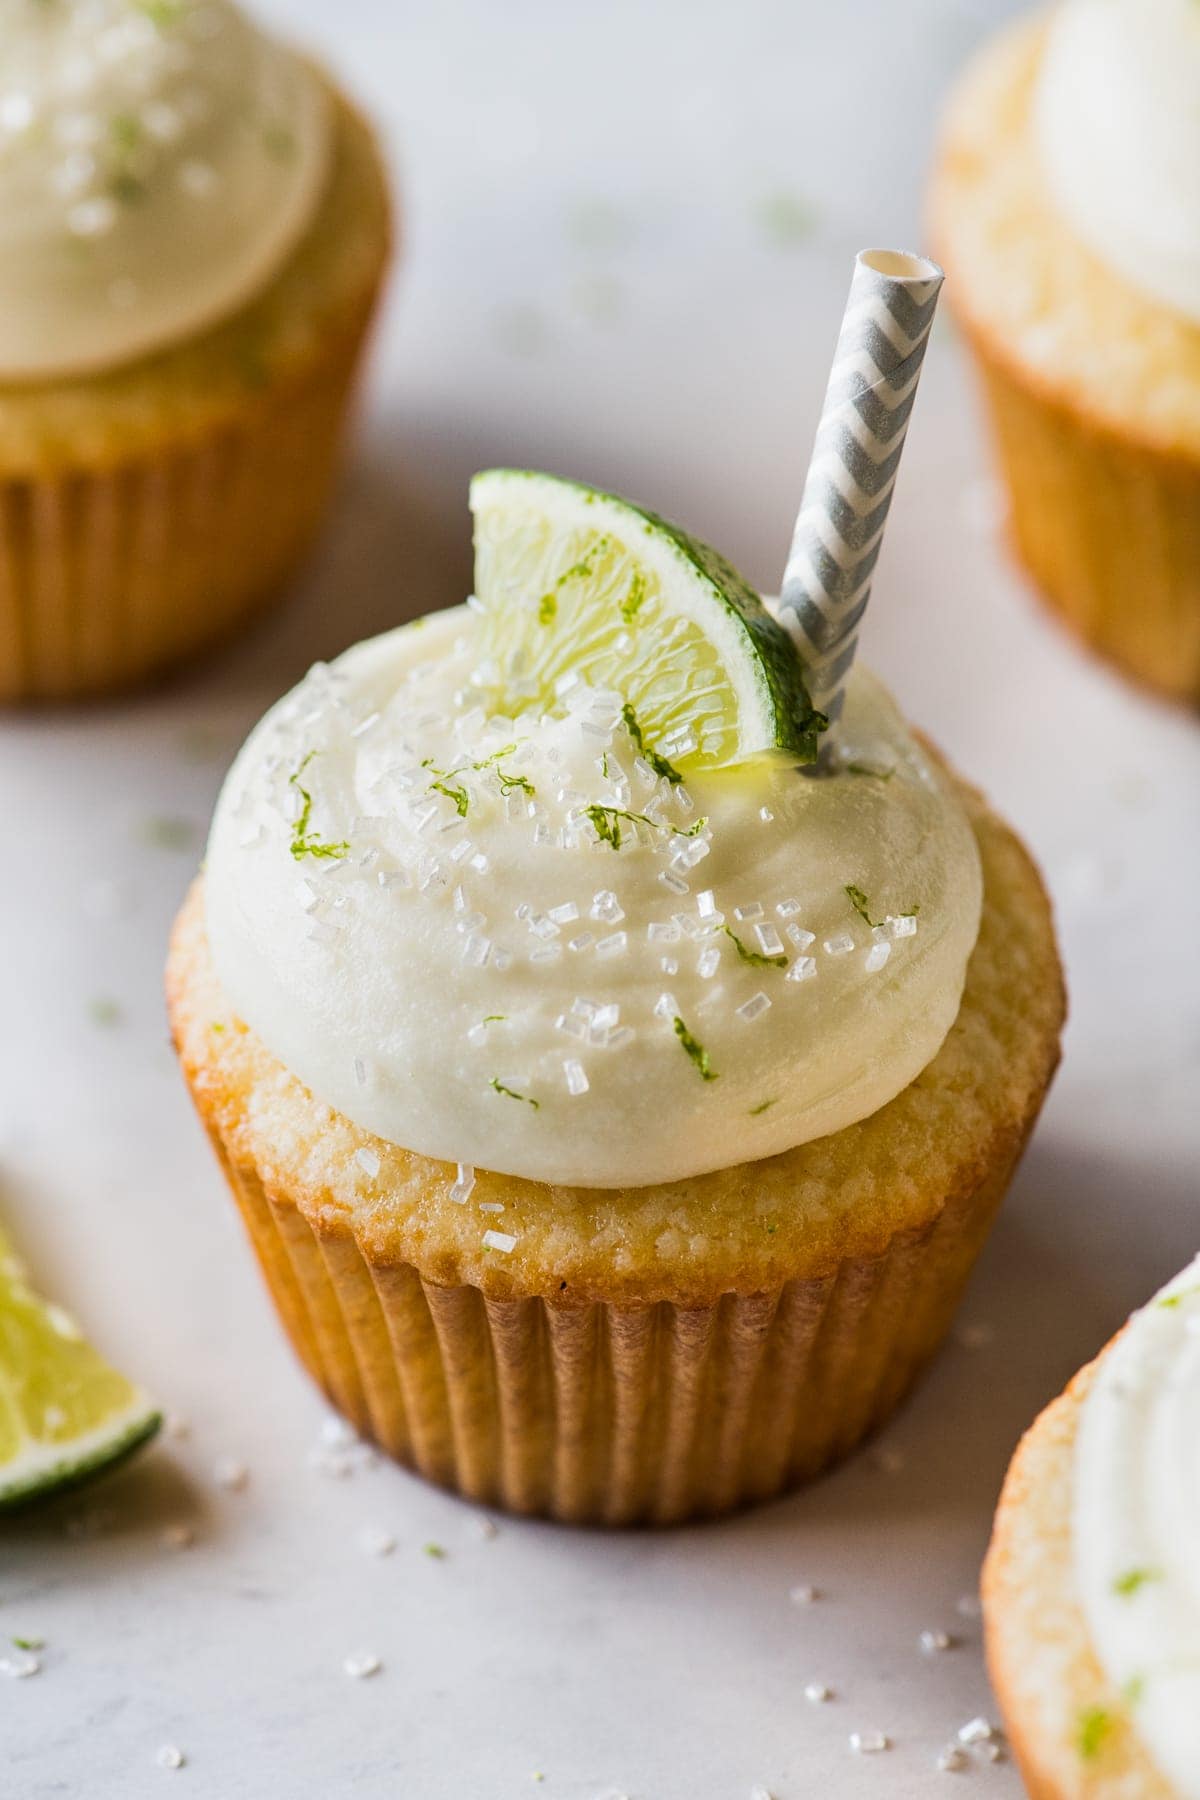 Margarita cupcakes topped with cream cheese frosting.